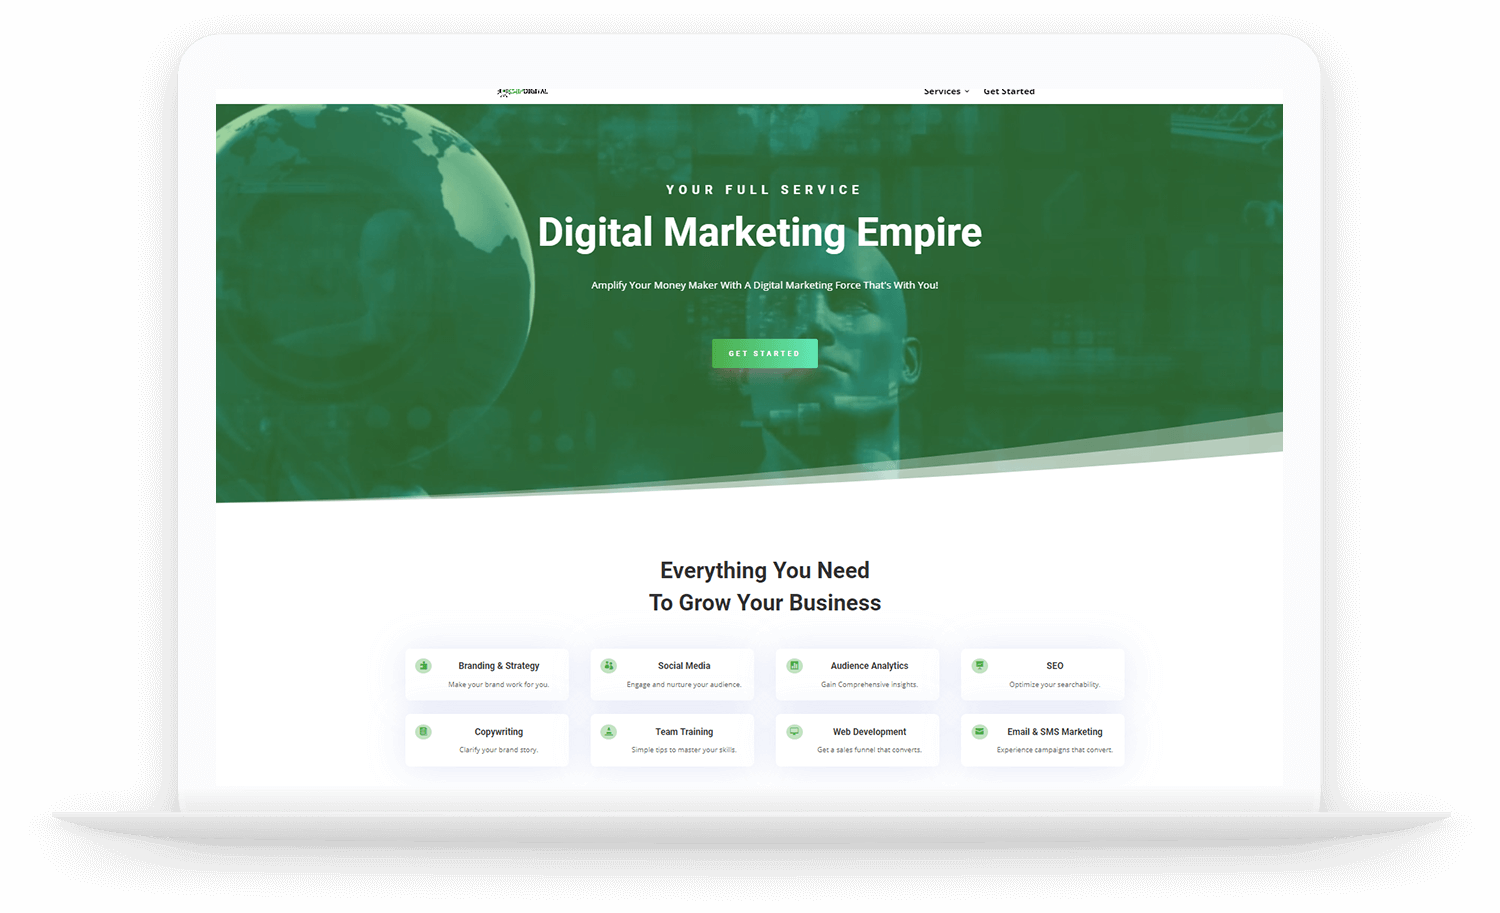 CHIP-DIGITAL-Your-Full-Service-Digital-Marketing-Empire---Branding-and-Strategy---Section